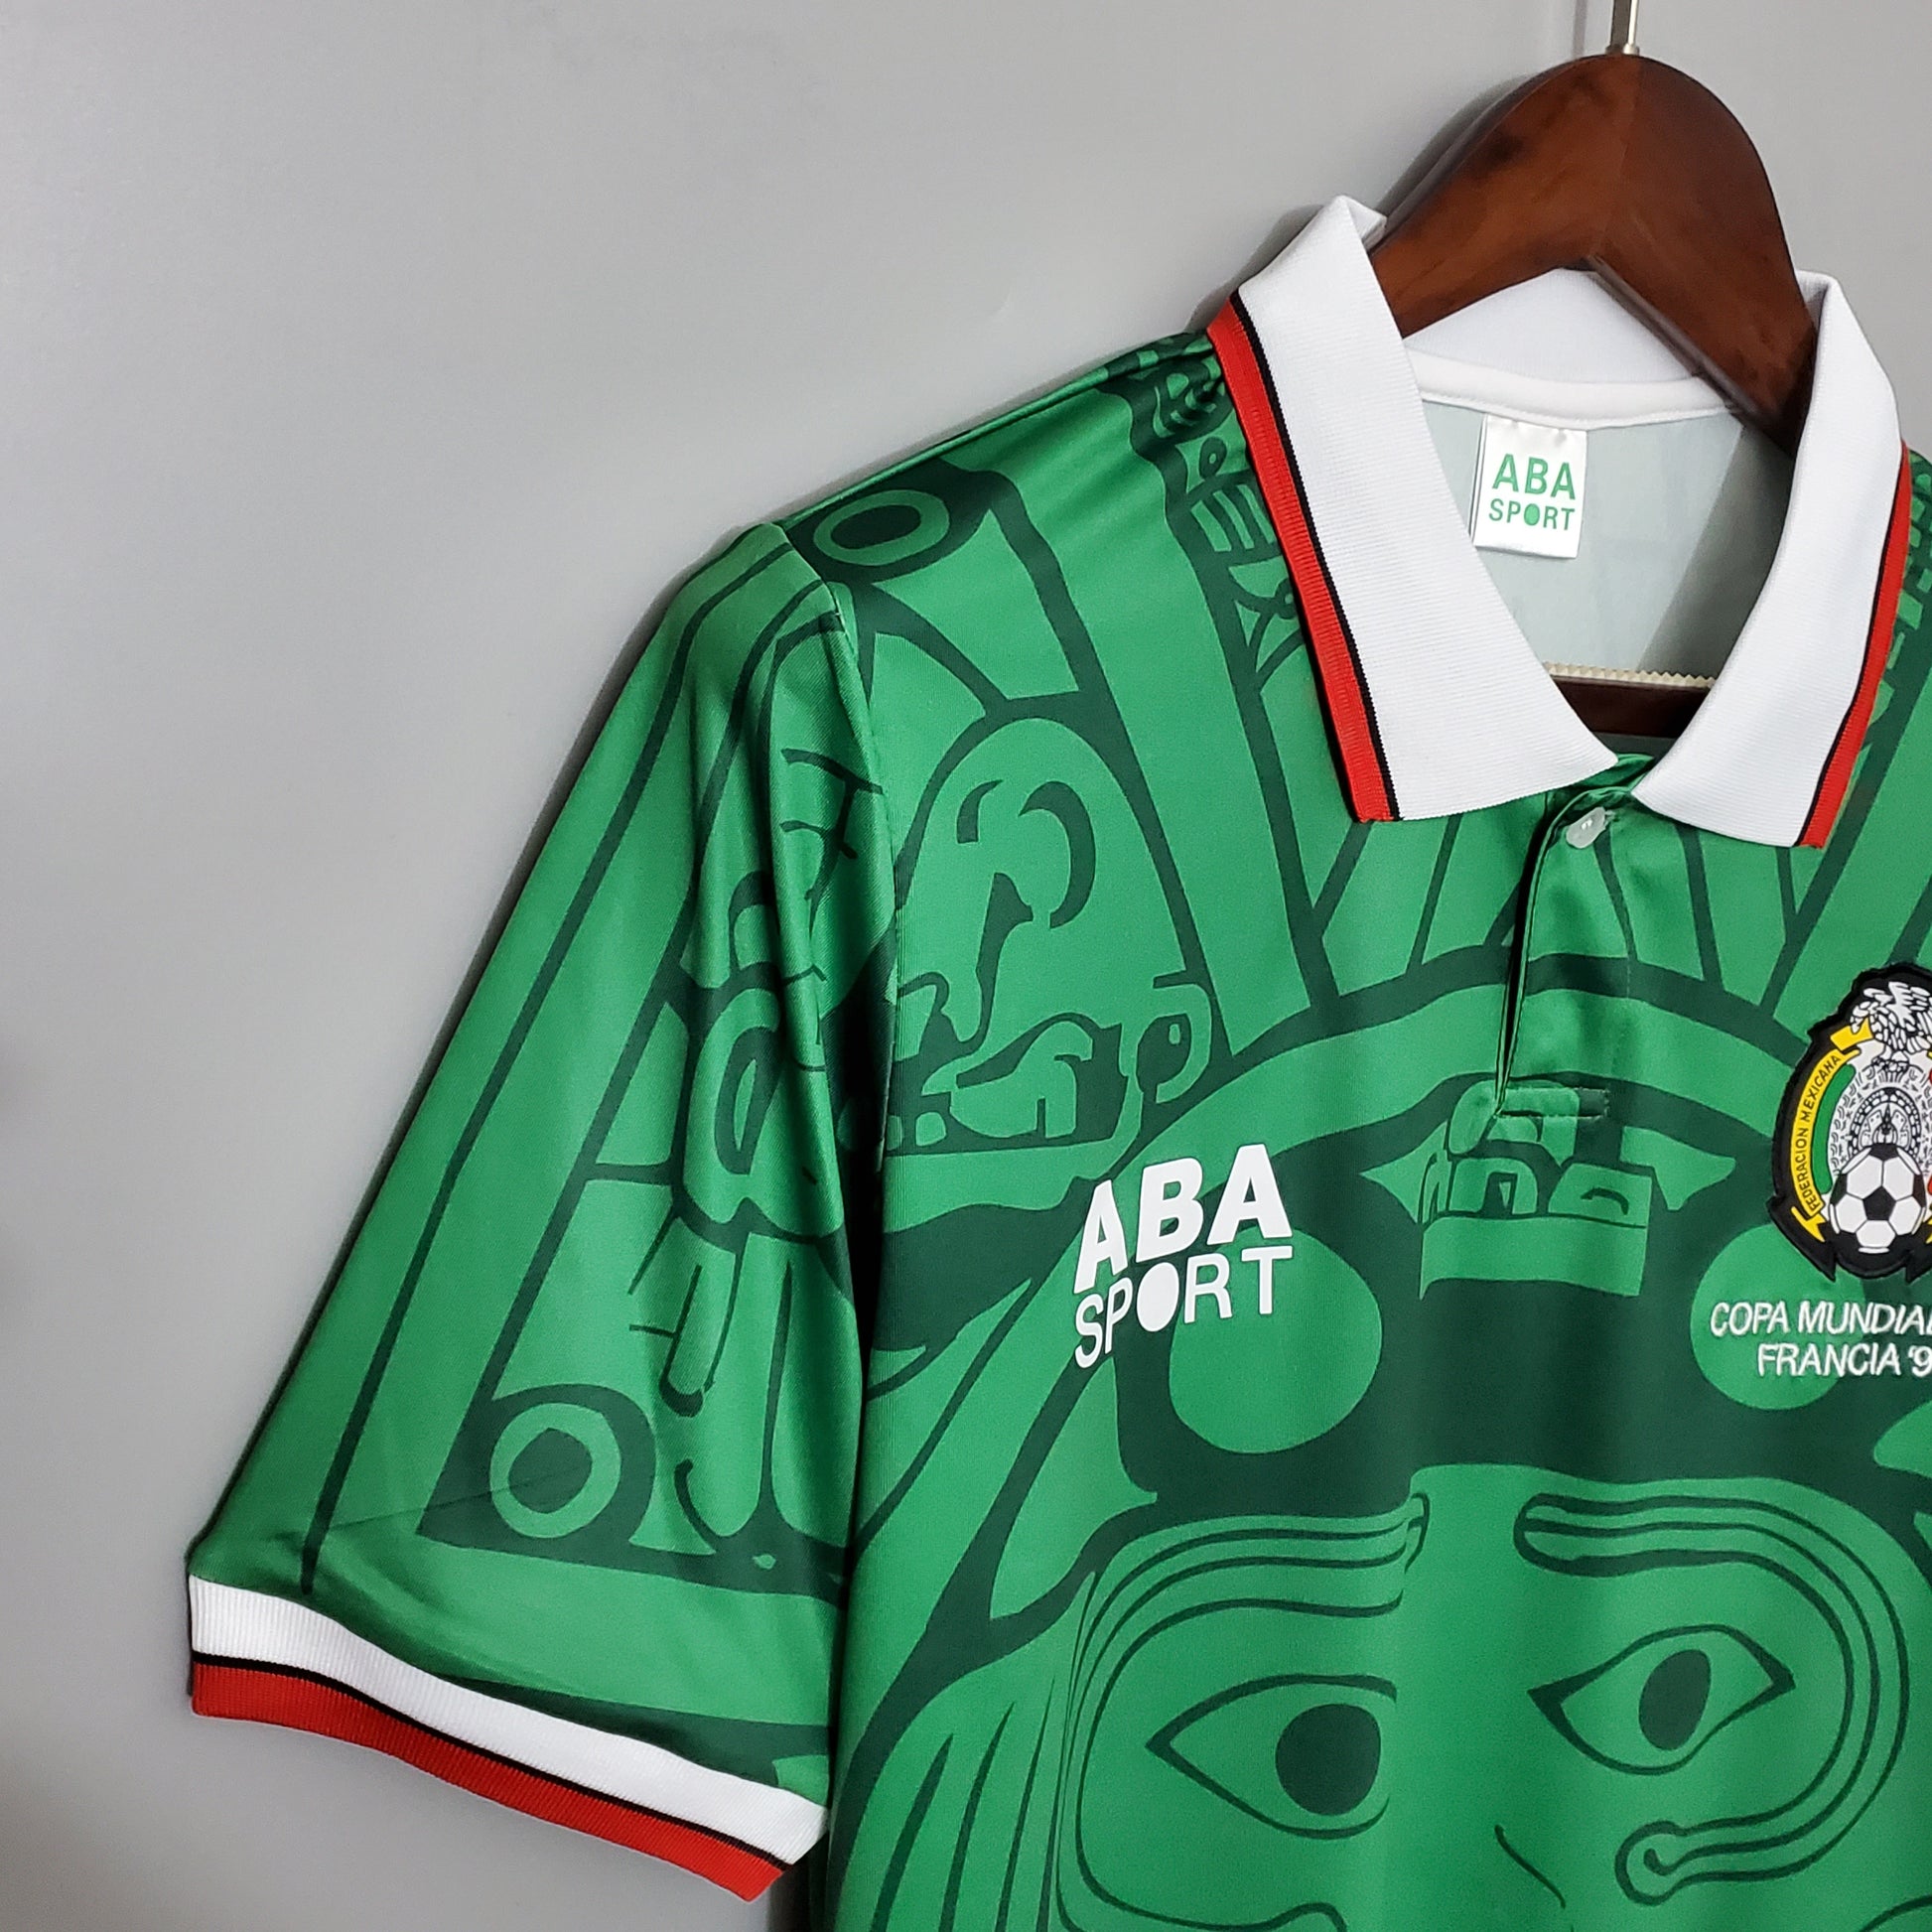 ABA Sport Mexico Jersey Authentic 1998 World Cup Soccer Polyester Short  Sleeve